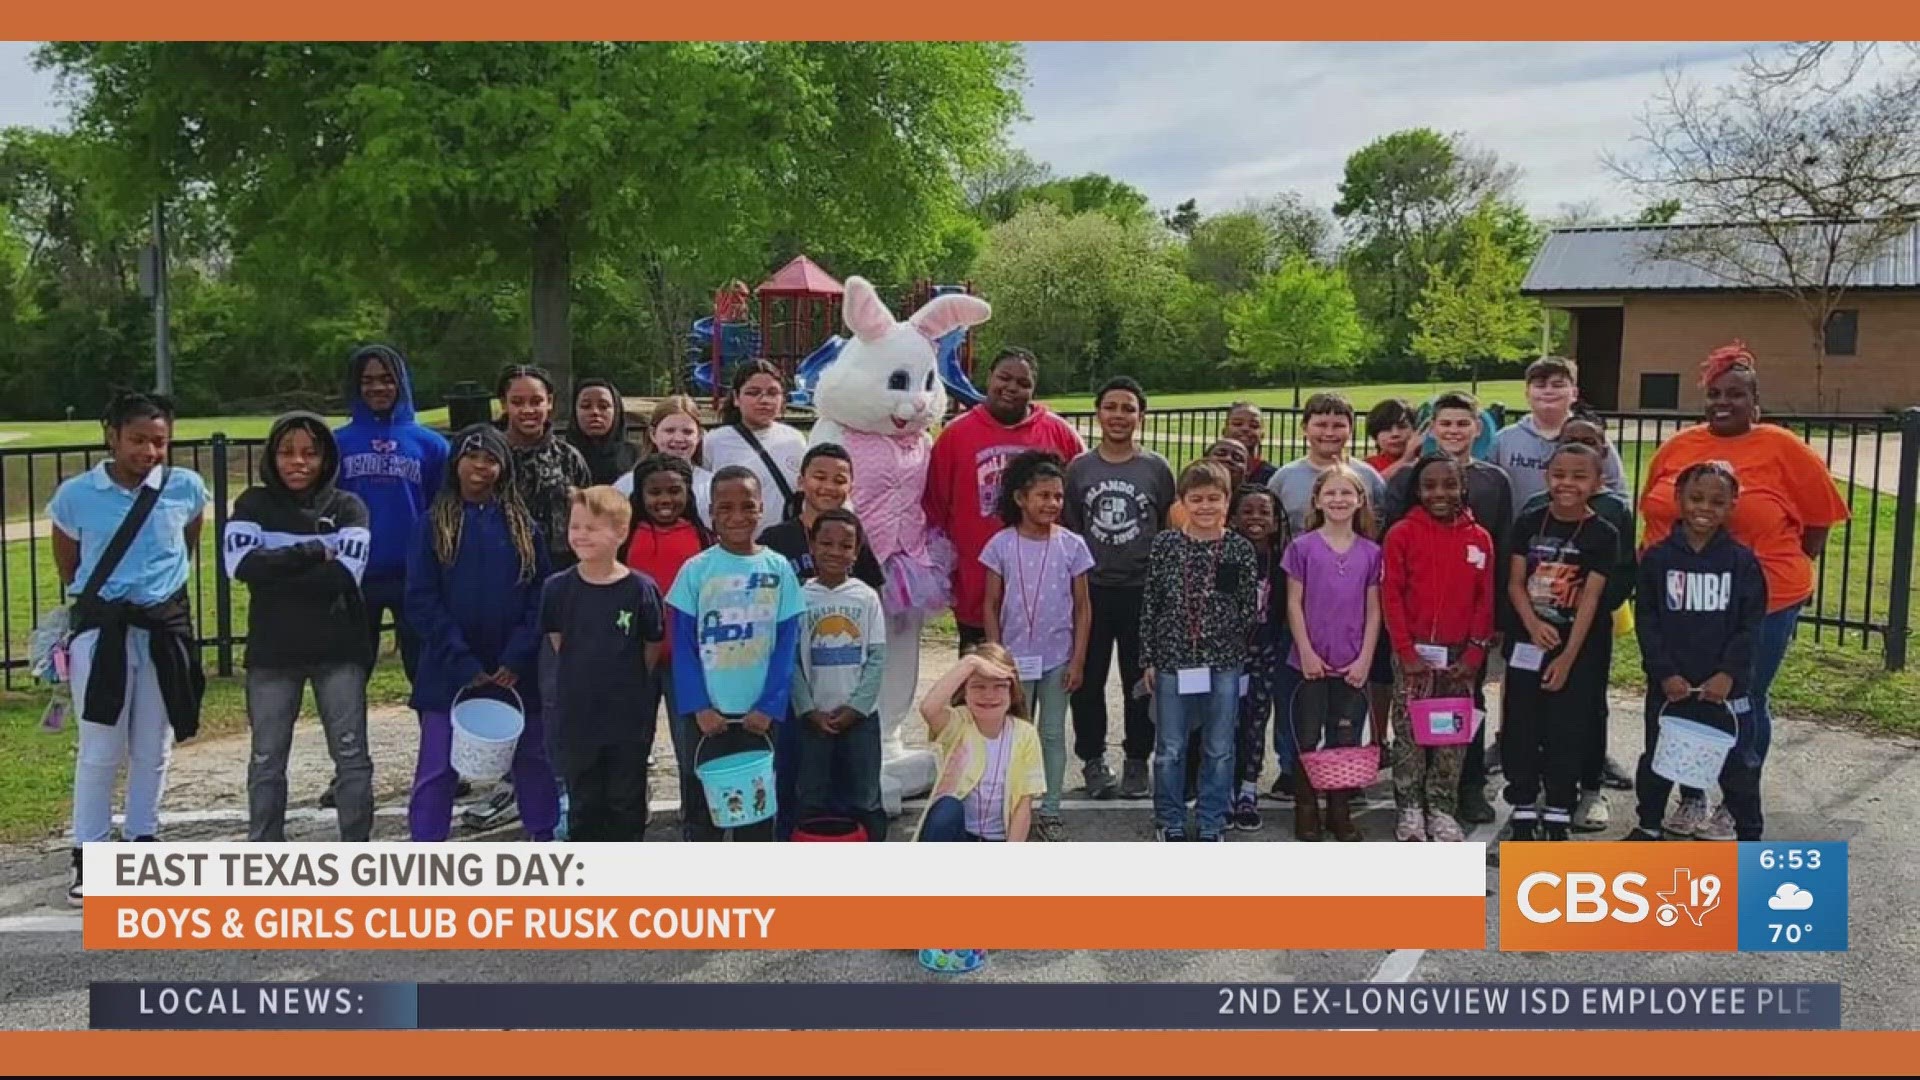 EAST TEXAS GIVING DAY: Boys & Girls Club of Rusk County